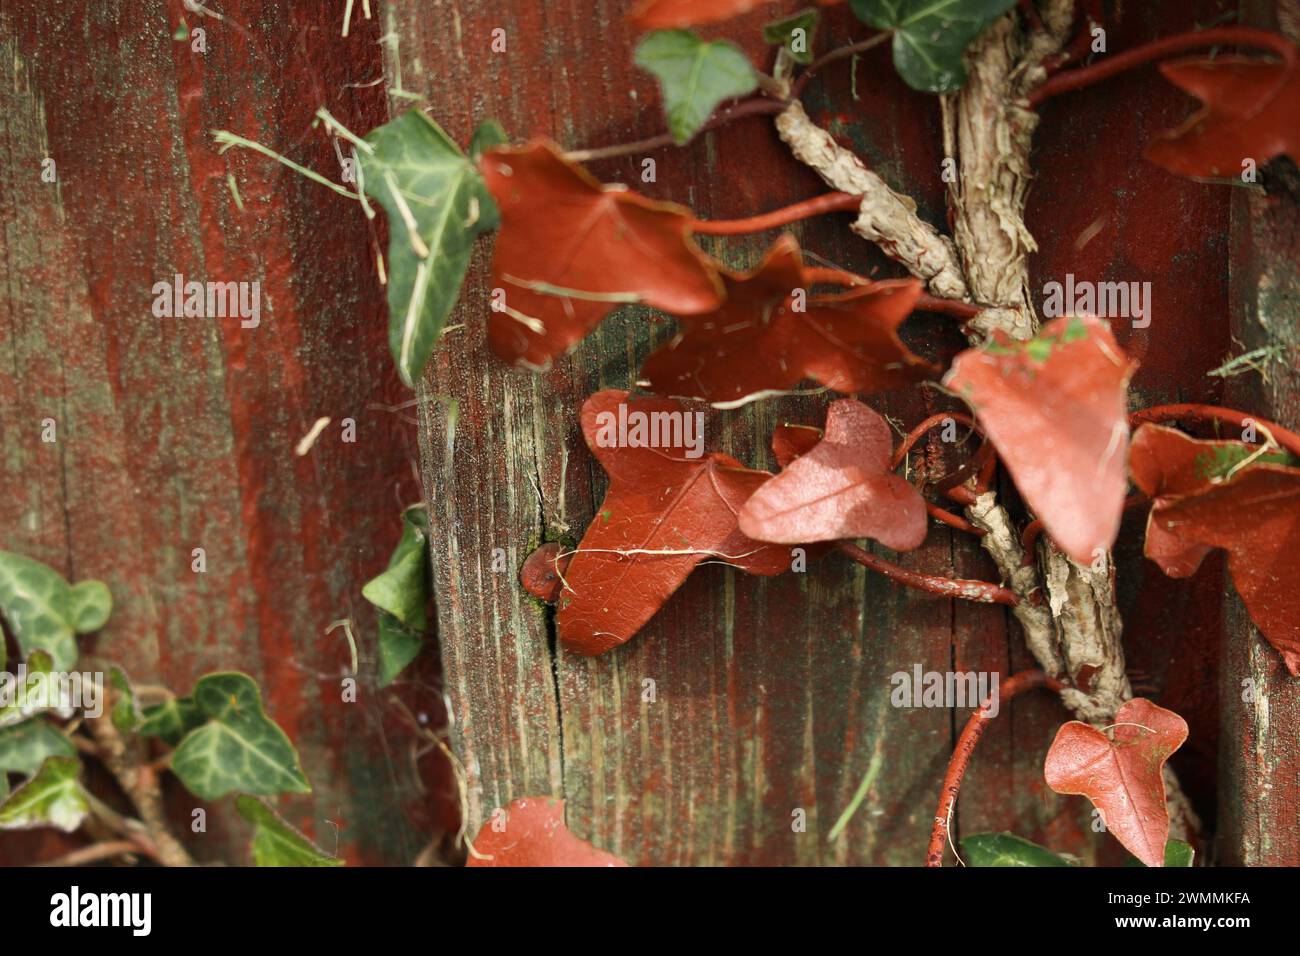 Natural green ivy growing on a wooden fence, covered in iron red paint from when the fence was painted. Concept for contaminating nature, cool art Stock Photo